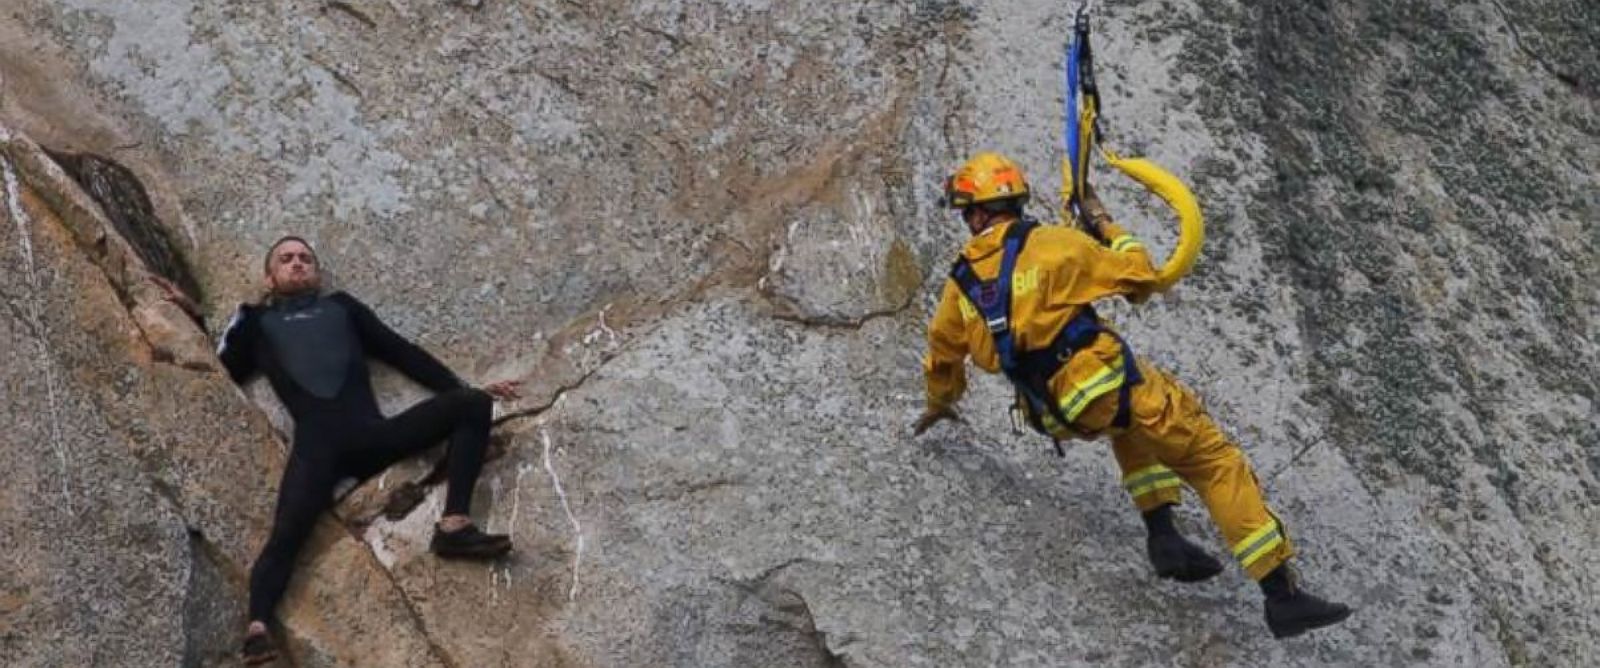 Man Rescued From Cliff After Proposal Gone Awry